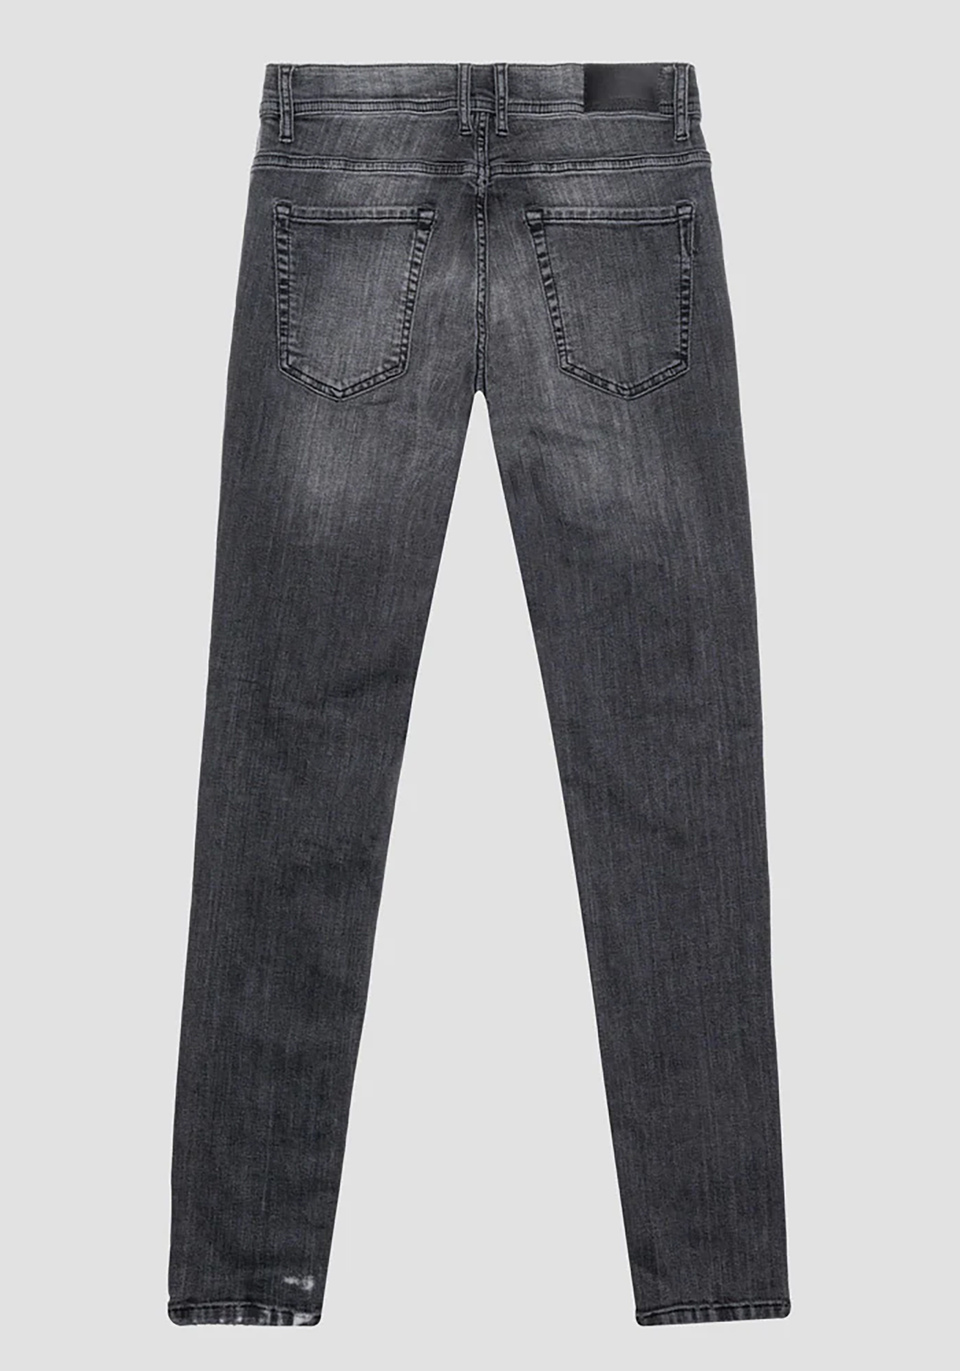 JEANS GILMOUR SUPER SKINNY FIT IN POWER STRETCH - Antony Morato Online Shop